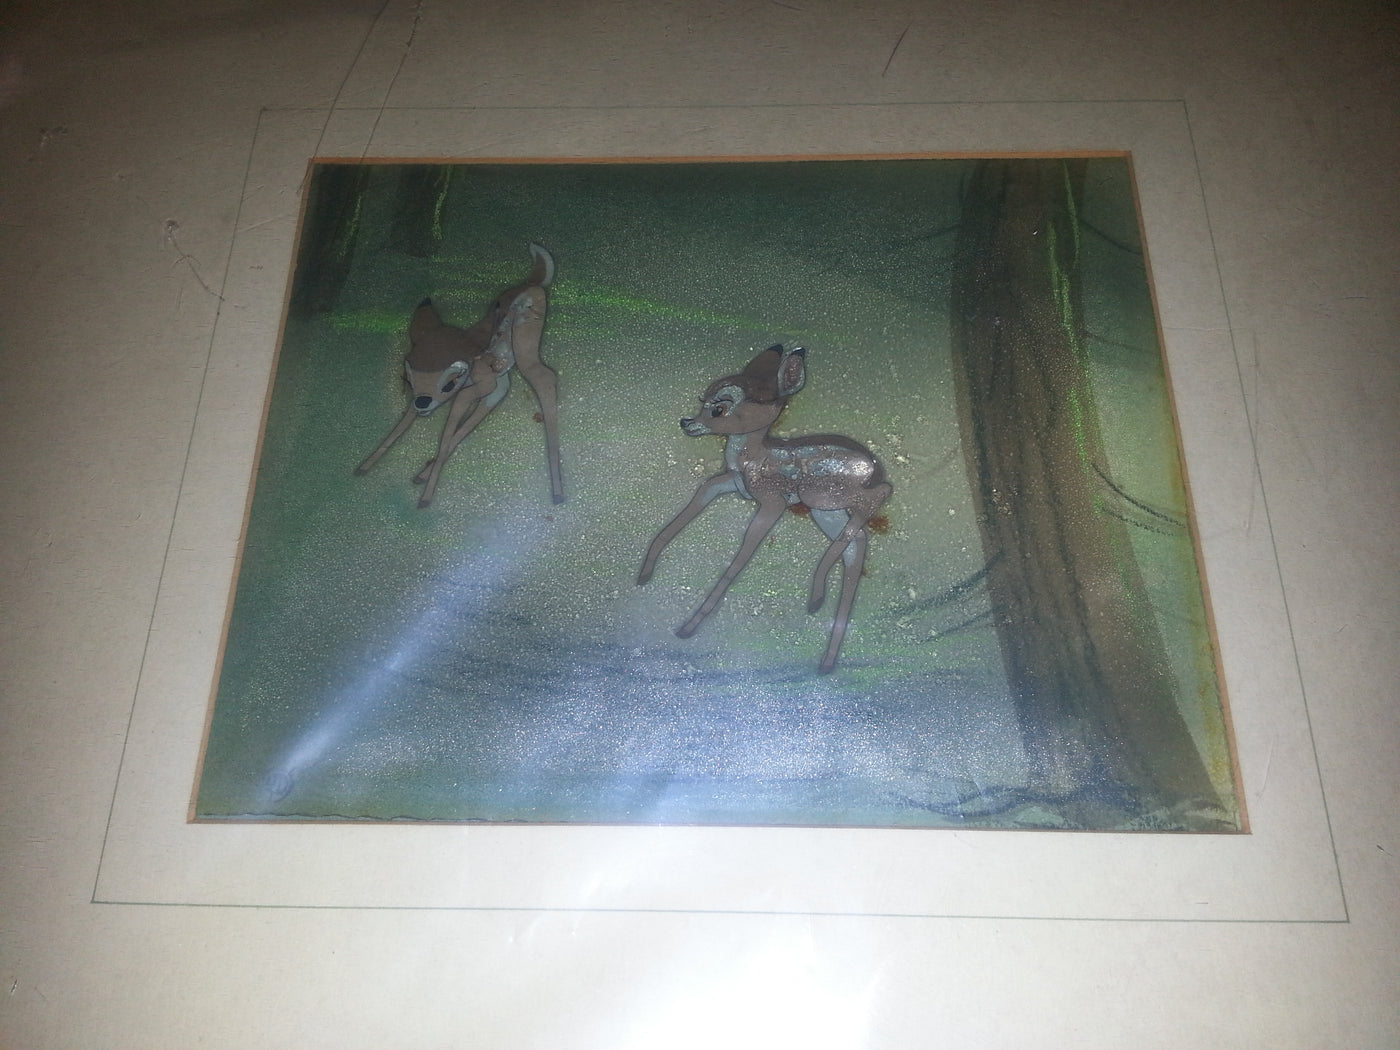 Disney Animation Production Cel Featuring Bambi on Courvoisier Background